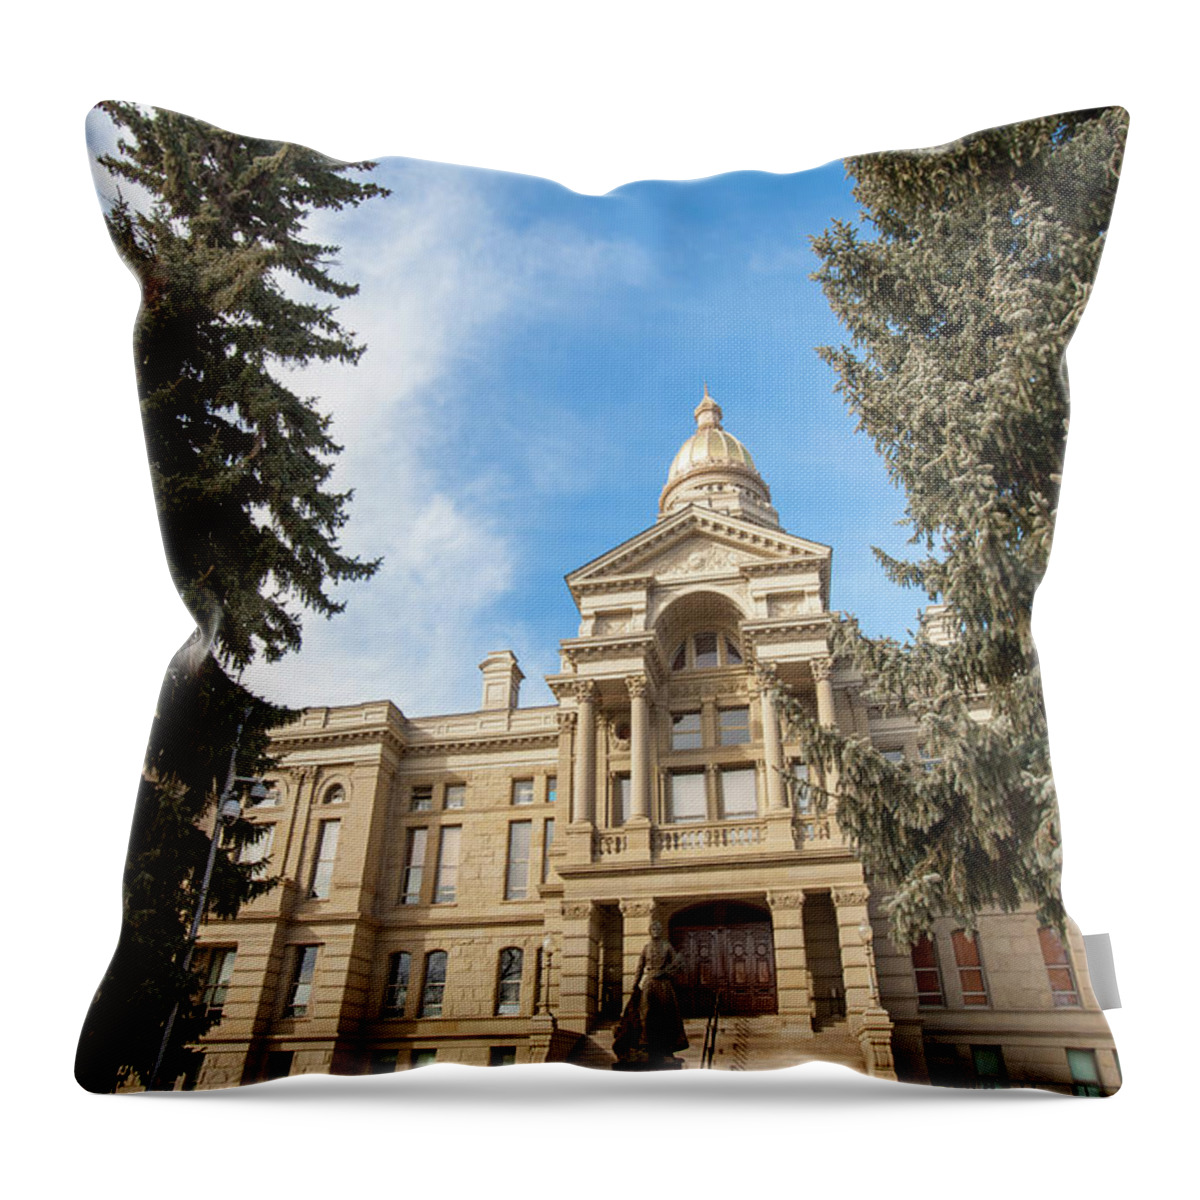 Cheyenne Wyoming Throw Pillow featuring the photograph Cheyenne Wyoming Capitol Building by Gregory Ballos